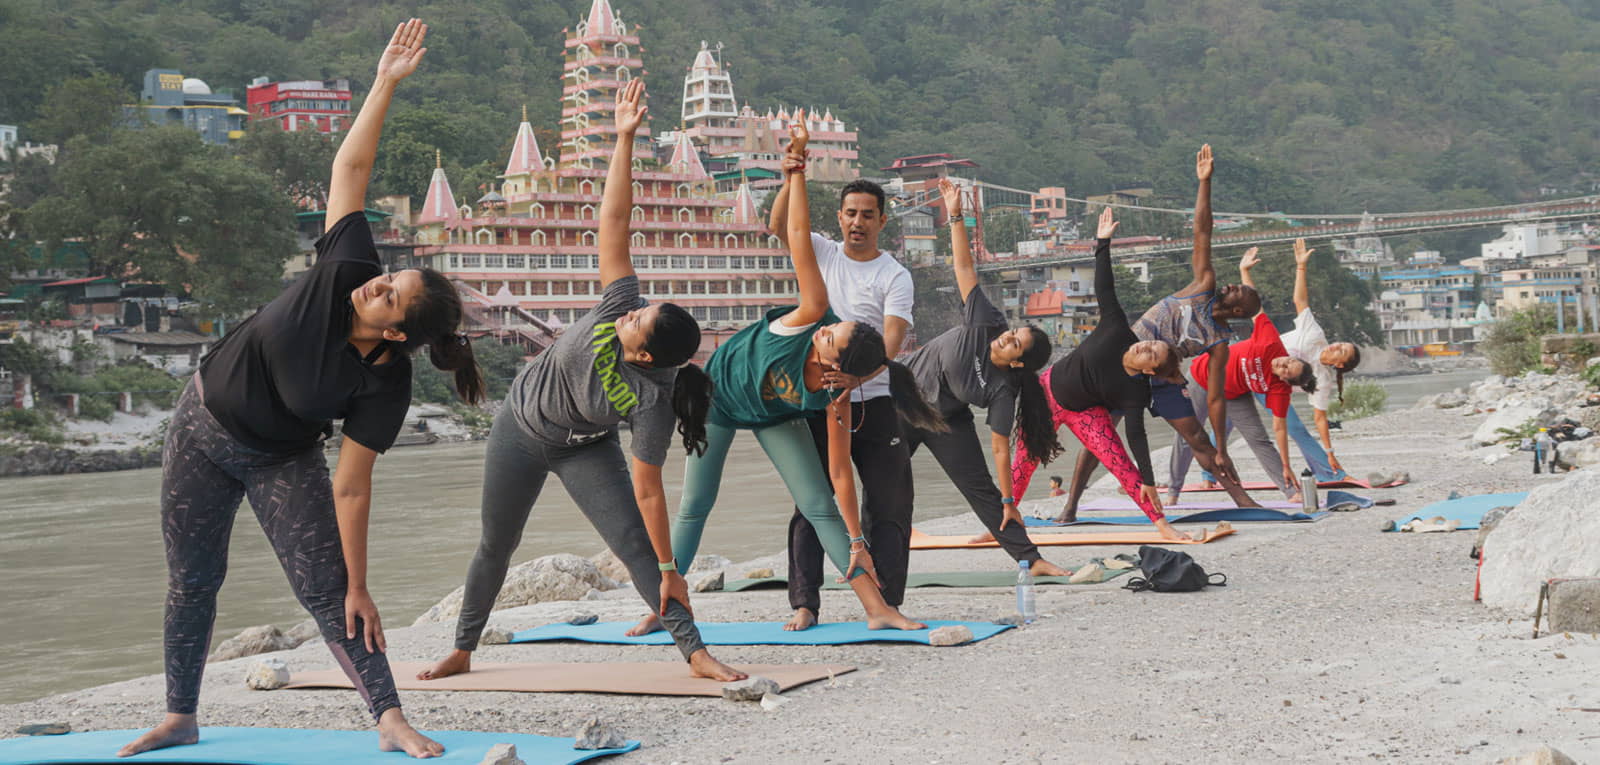 Yoga students in trikonasana (triangle pose) with a teacher adjusting during asana class by the river in Rishikesh, India.